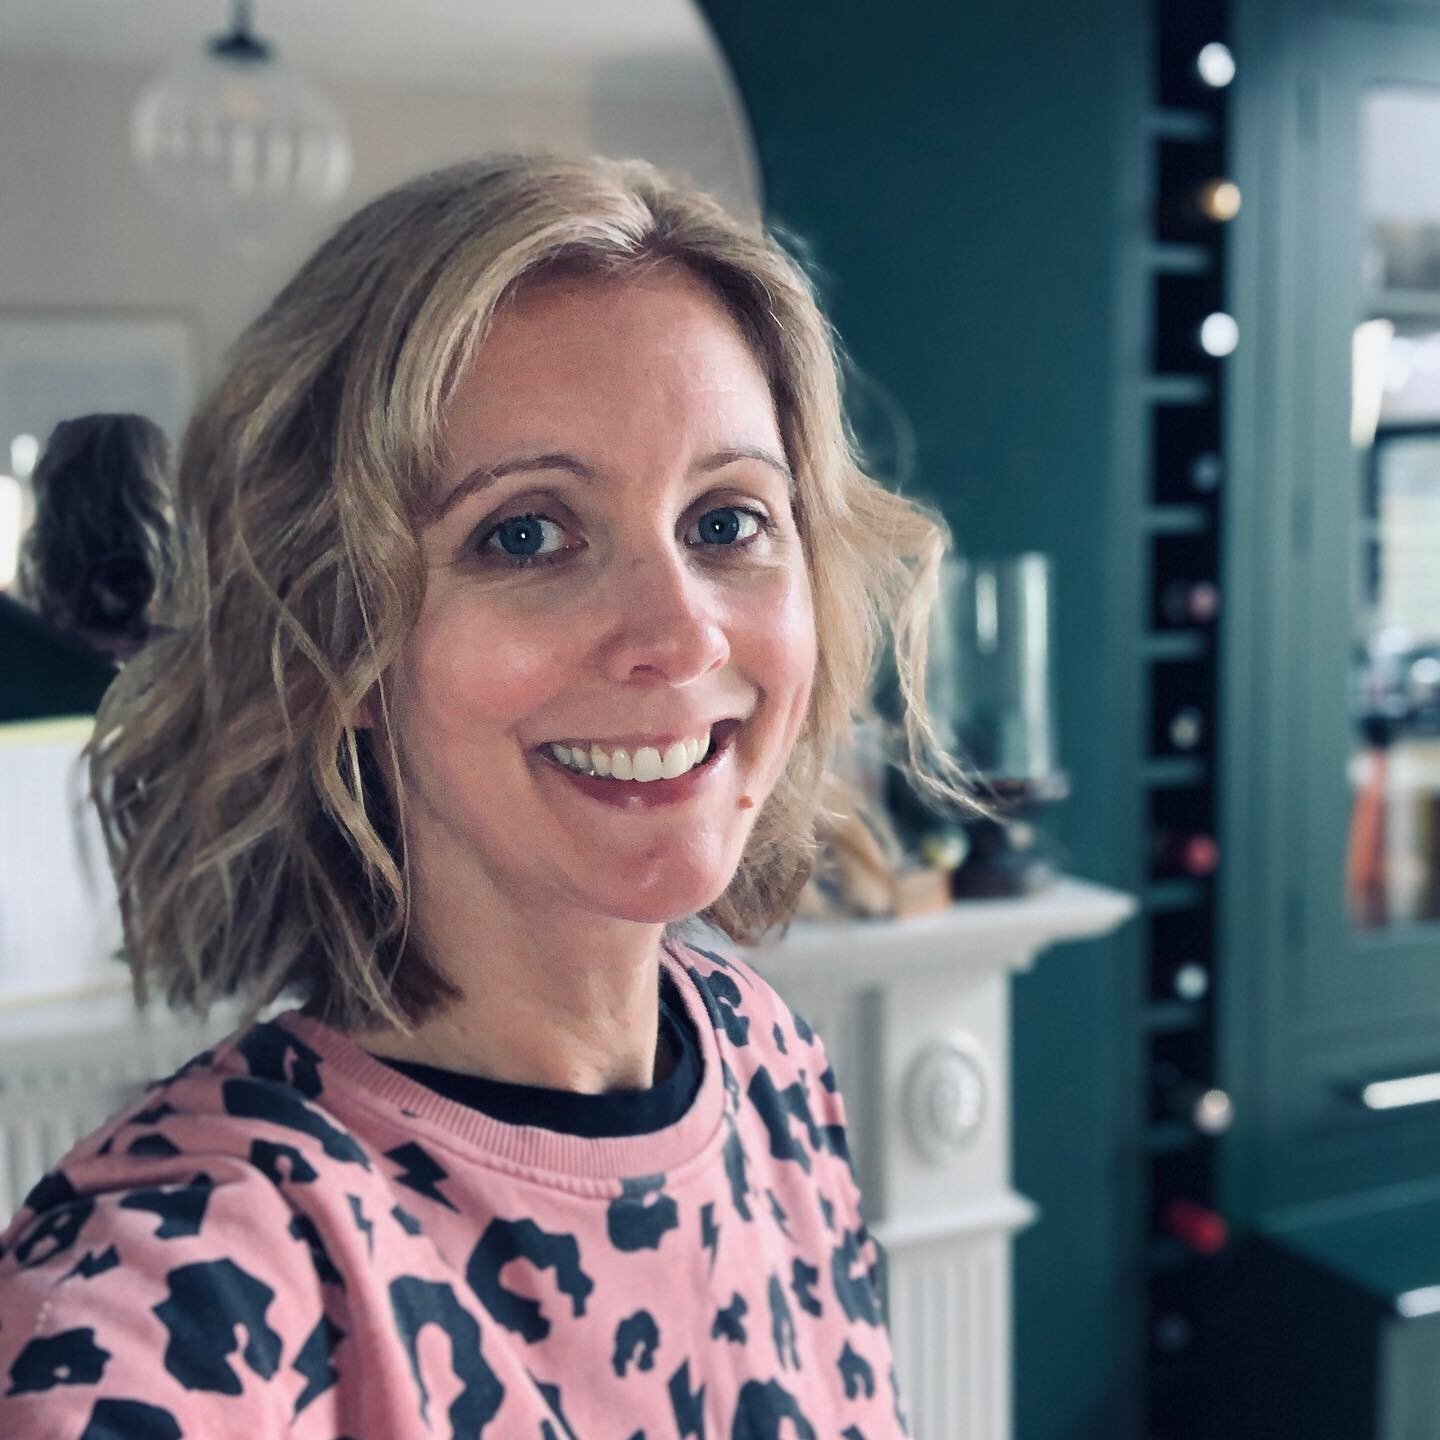 Hello! We&rsquo;ve been a bit quiet in here of late because life has been a bit hectic. We&rsquo;ve been doing consultancy roles, coaching and training workshops as well as trying to be mums and navigate the daily routines that come with that. 

This